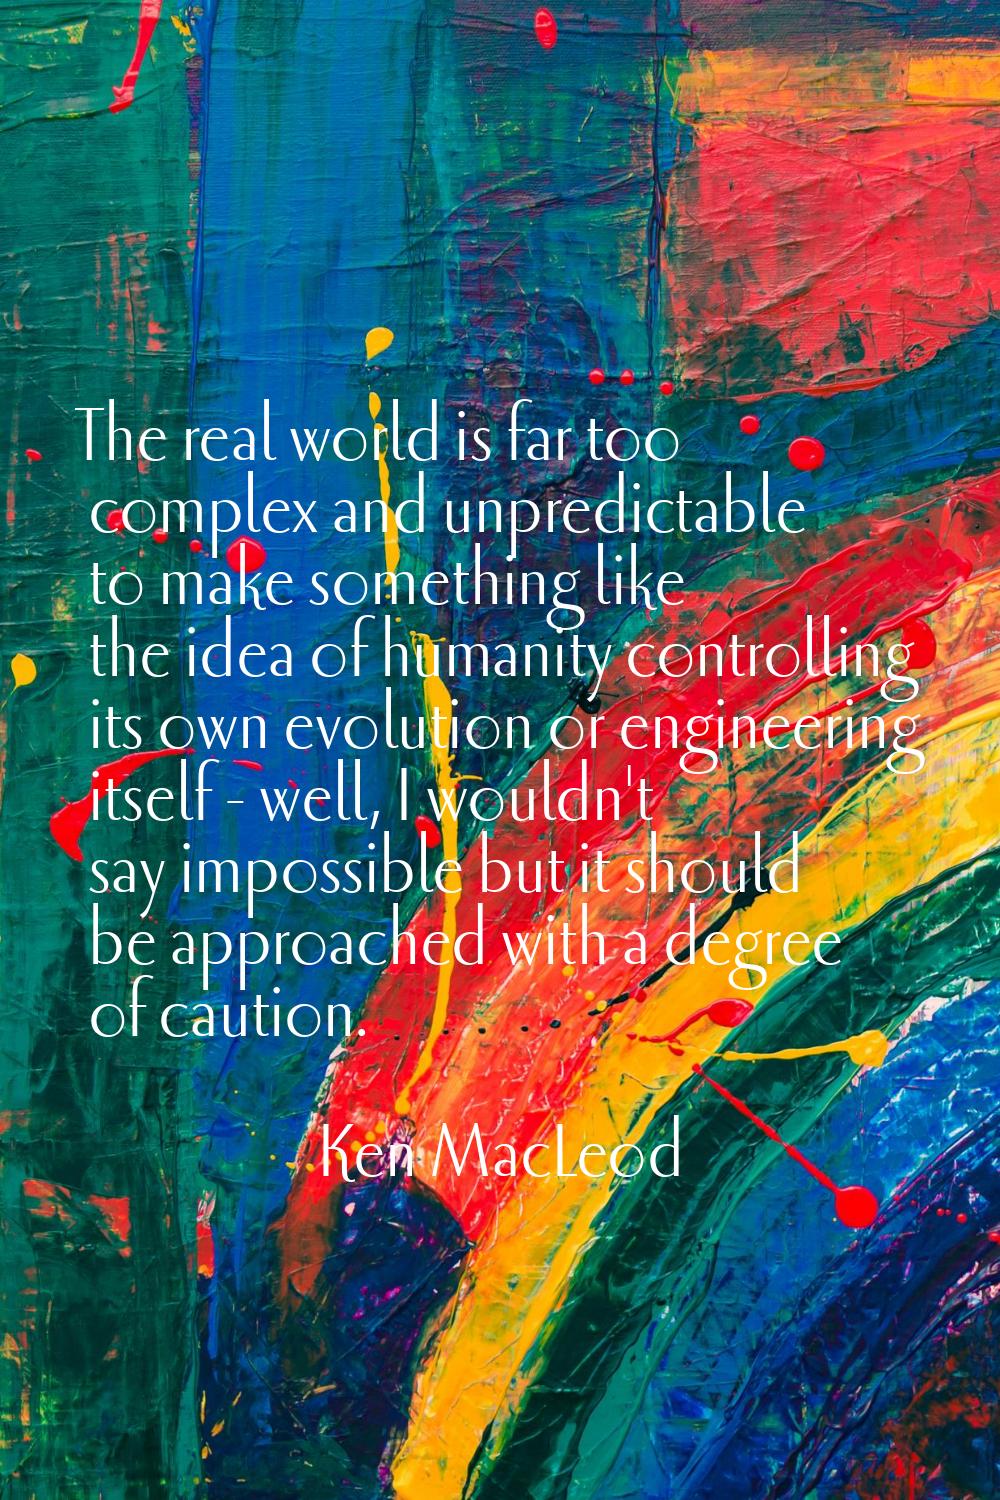 The real world is far too complex and unpredictable to make something like the idea of humanity con